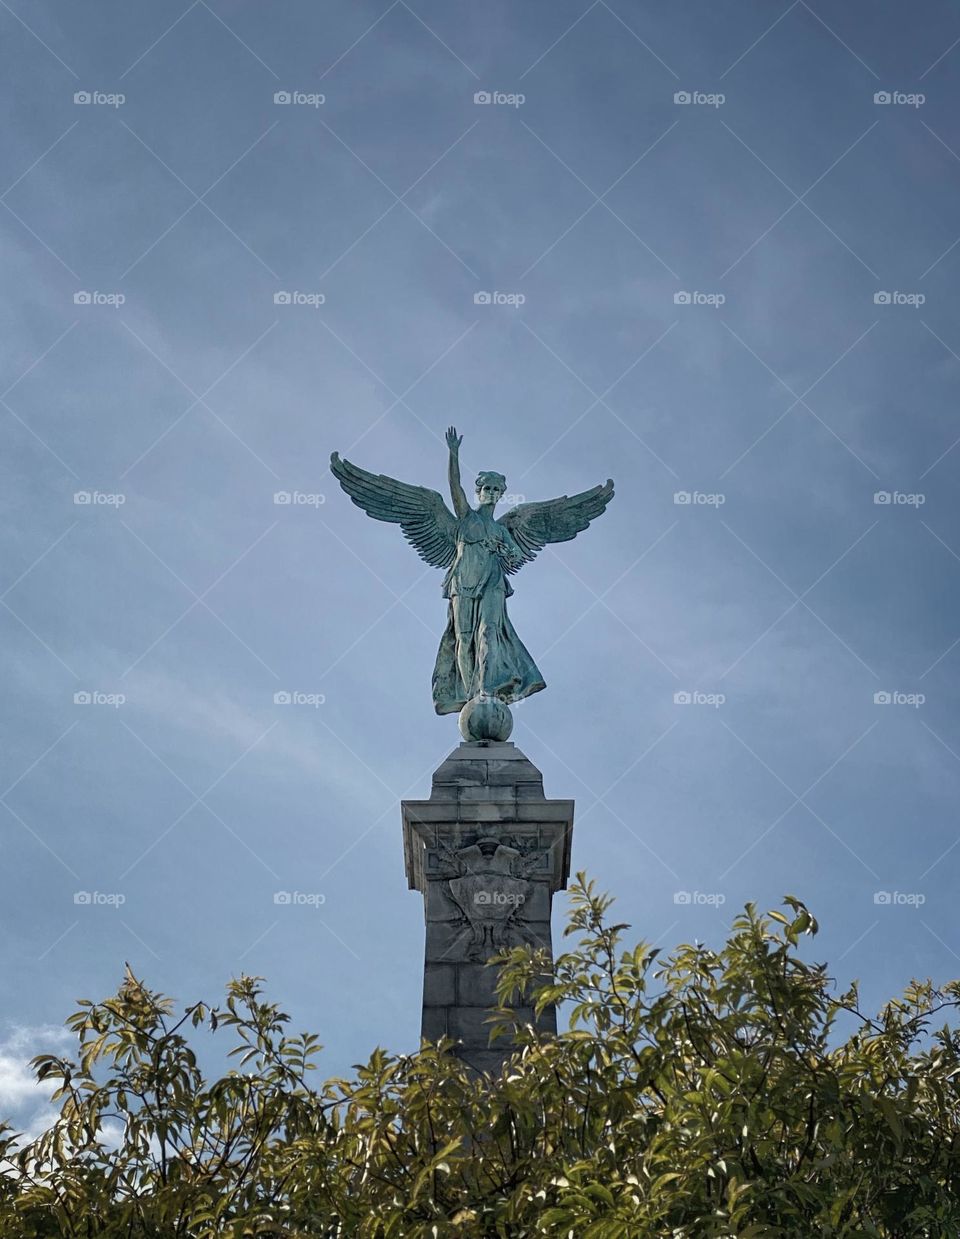 The winged Goddess of Liberty statue on top of the George-Étienne Cartier Monument at the entrance to Mount Royal Park in Montréal, Quebec, Canada